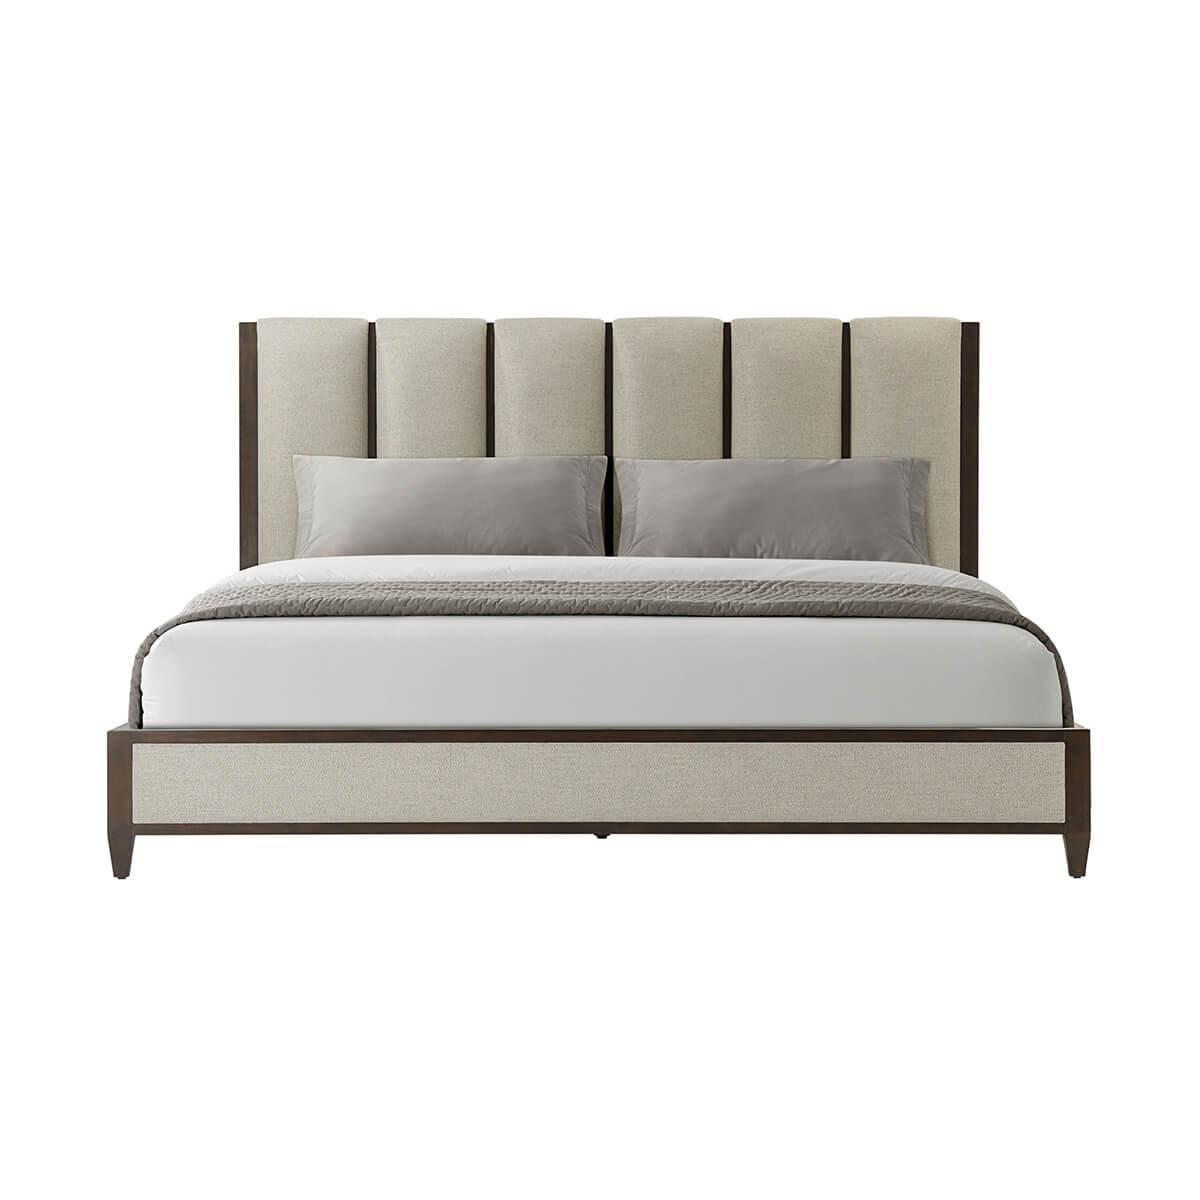 Featuring an upholstered platform frame and sophisticated channeled headboard, set within the dark Bistre finish.

Dimensions: 80